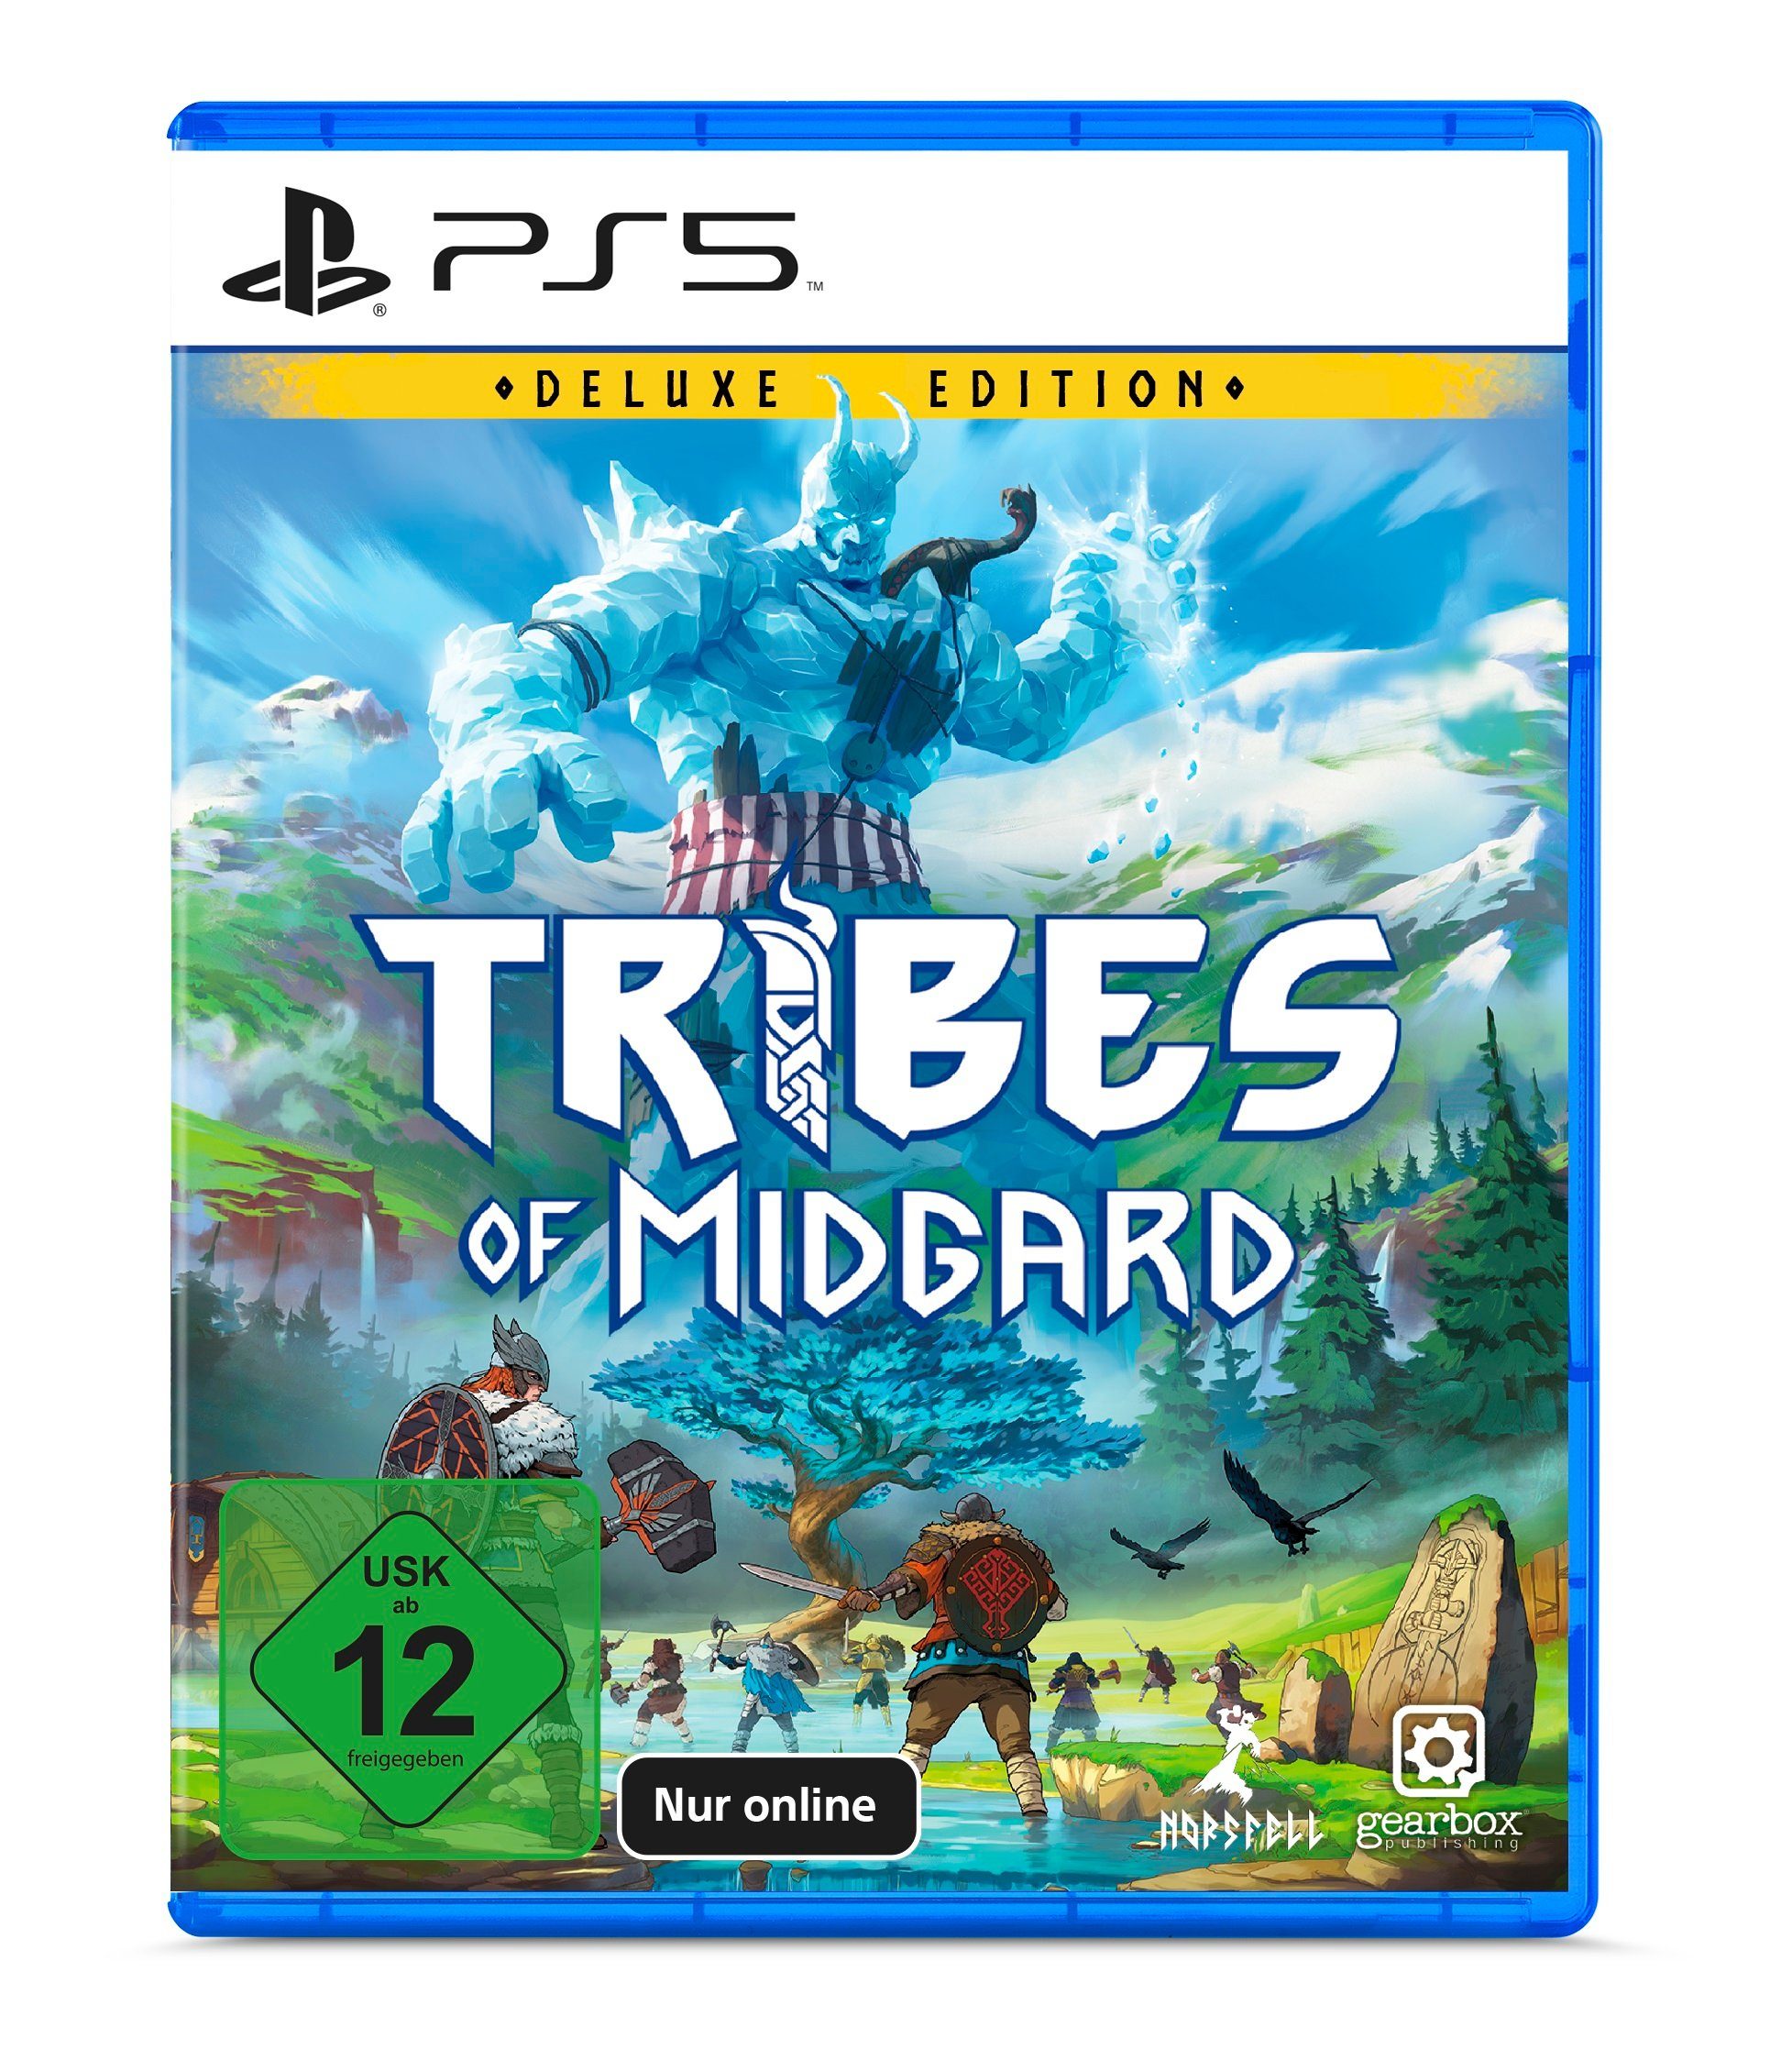 of PlayStation 5, Edition Deluxe Tribes Online Midgard nur